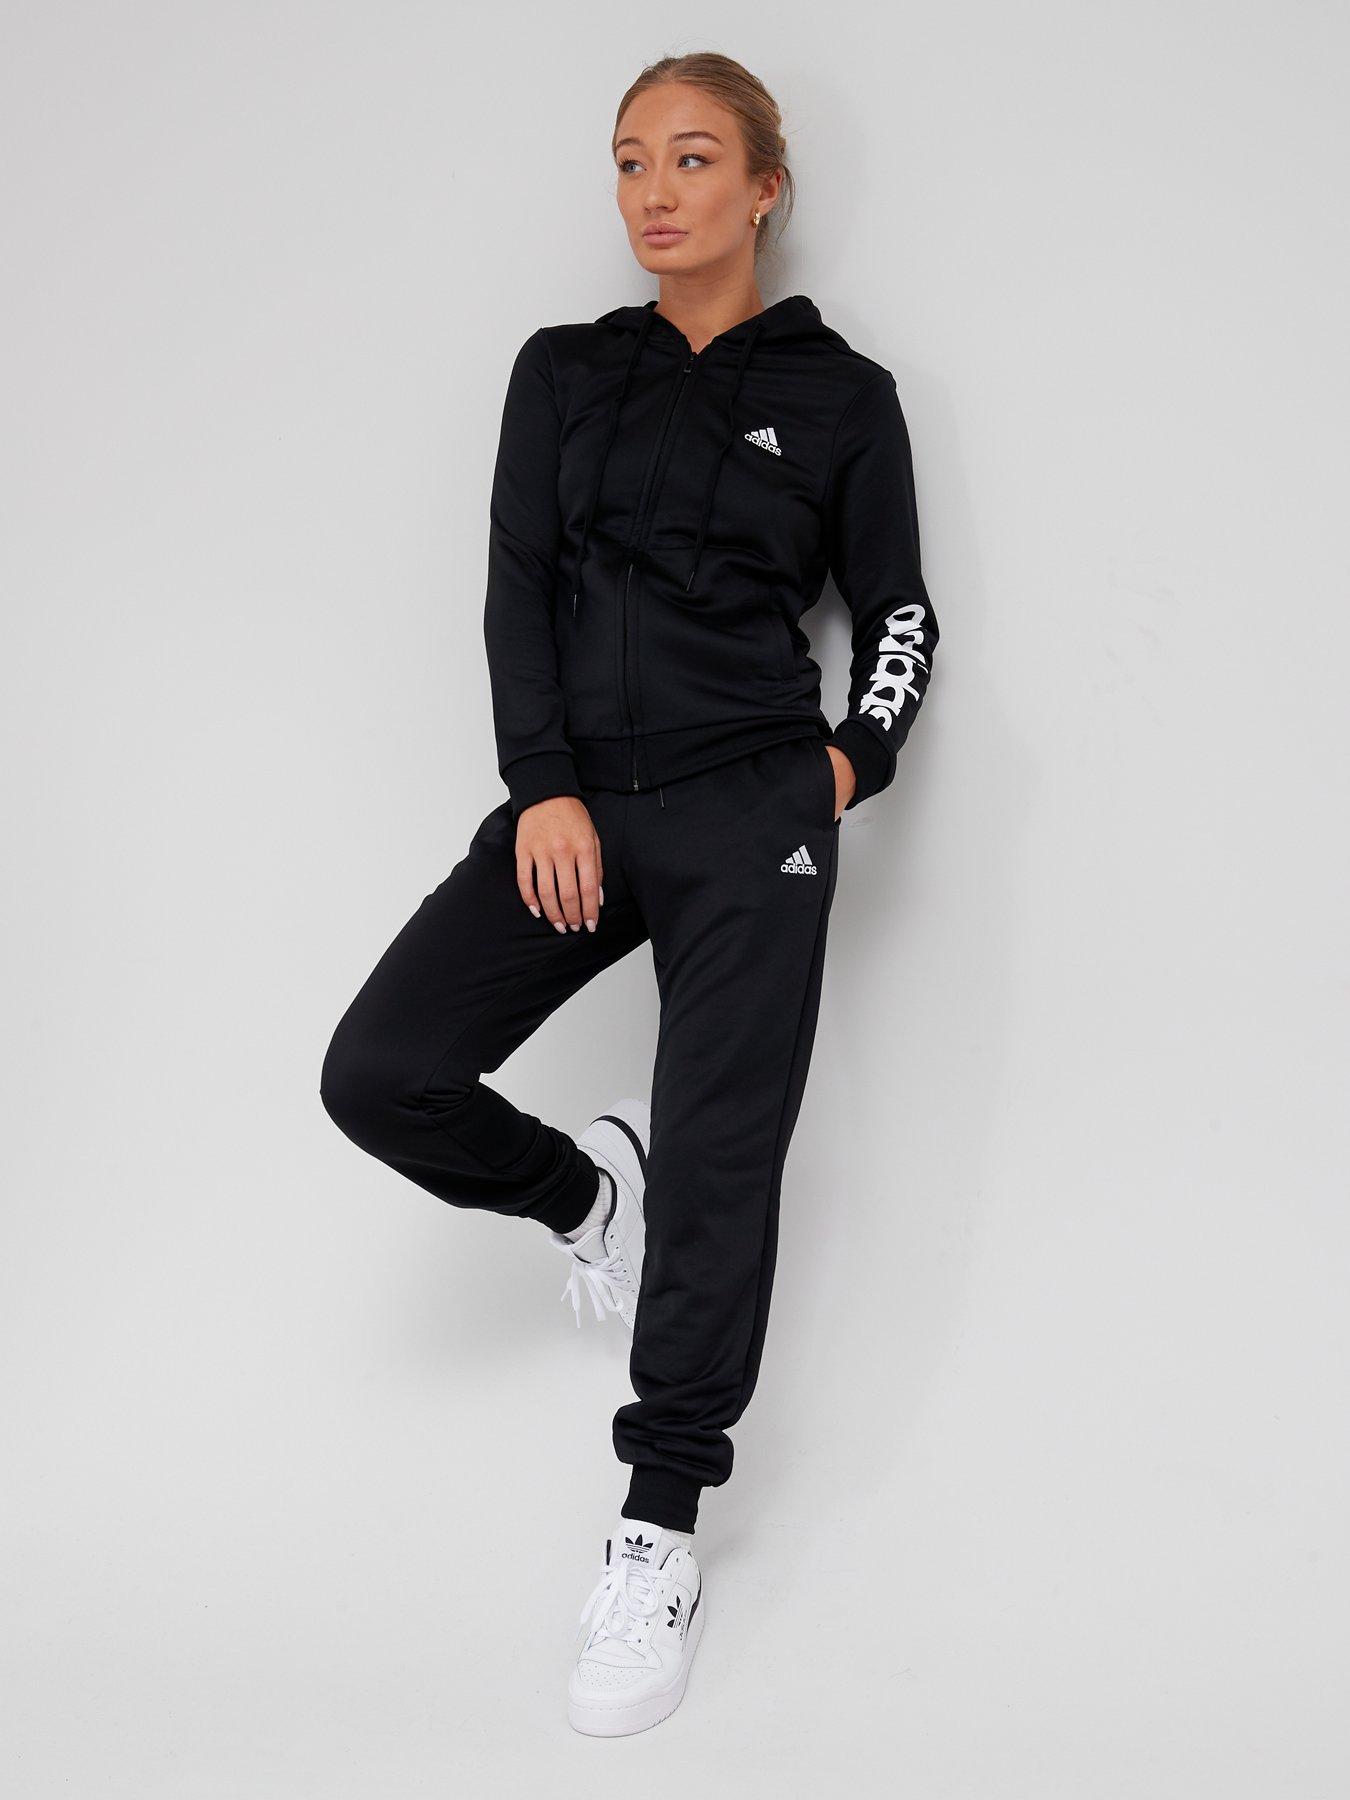 Ladies Tracksuits, Womens Tracksuits